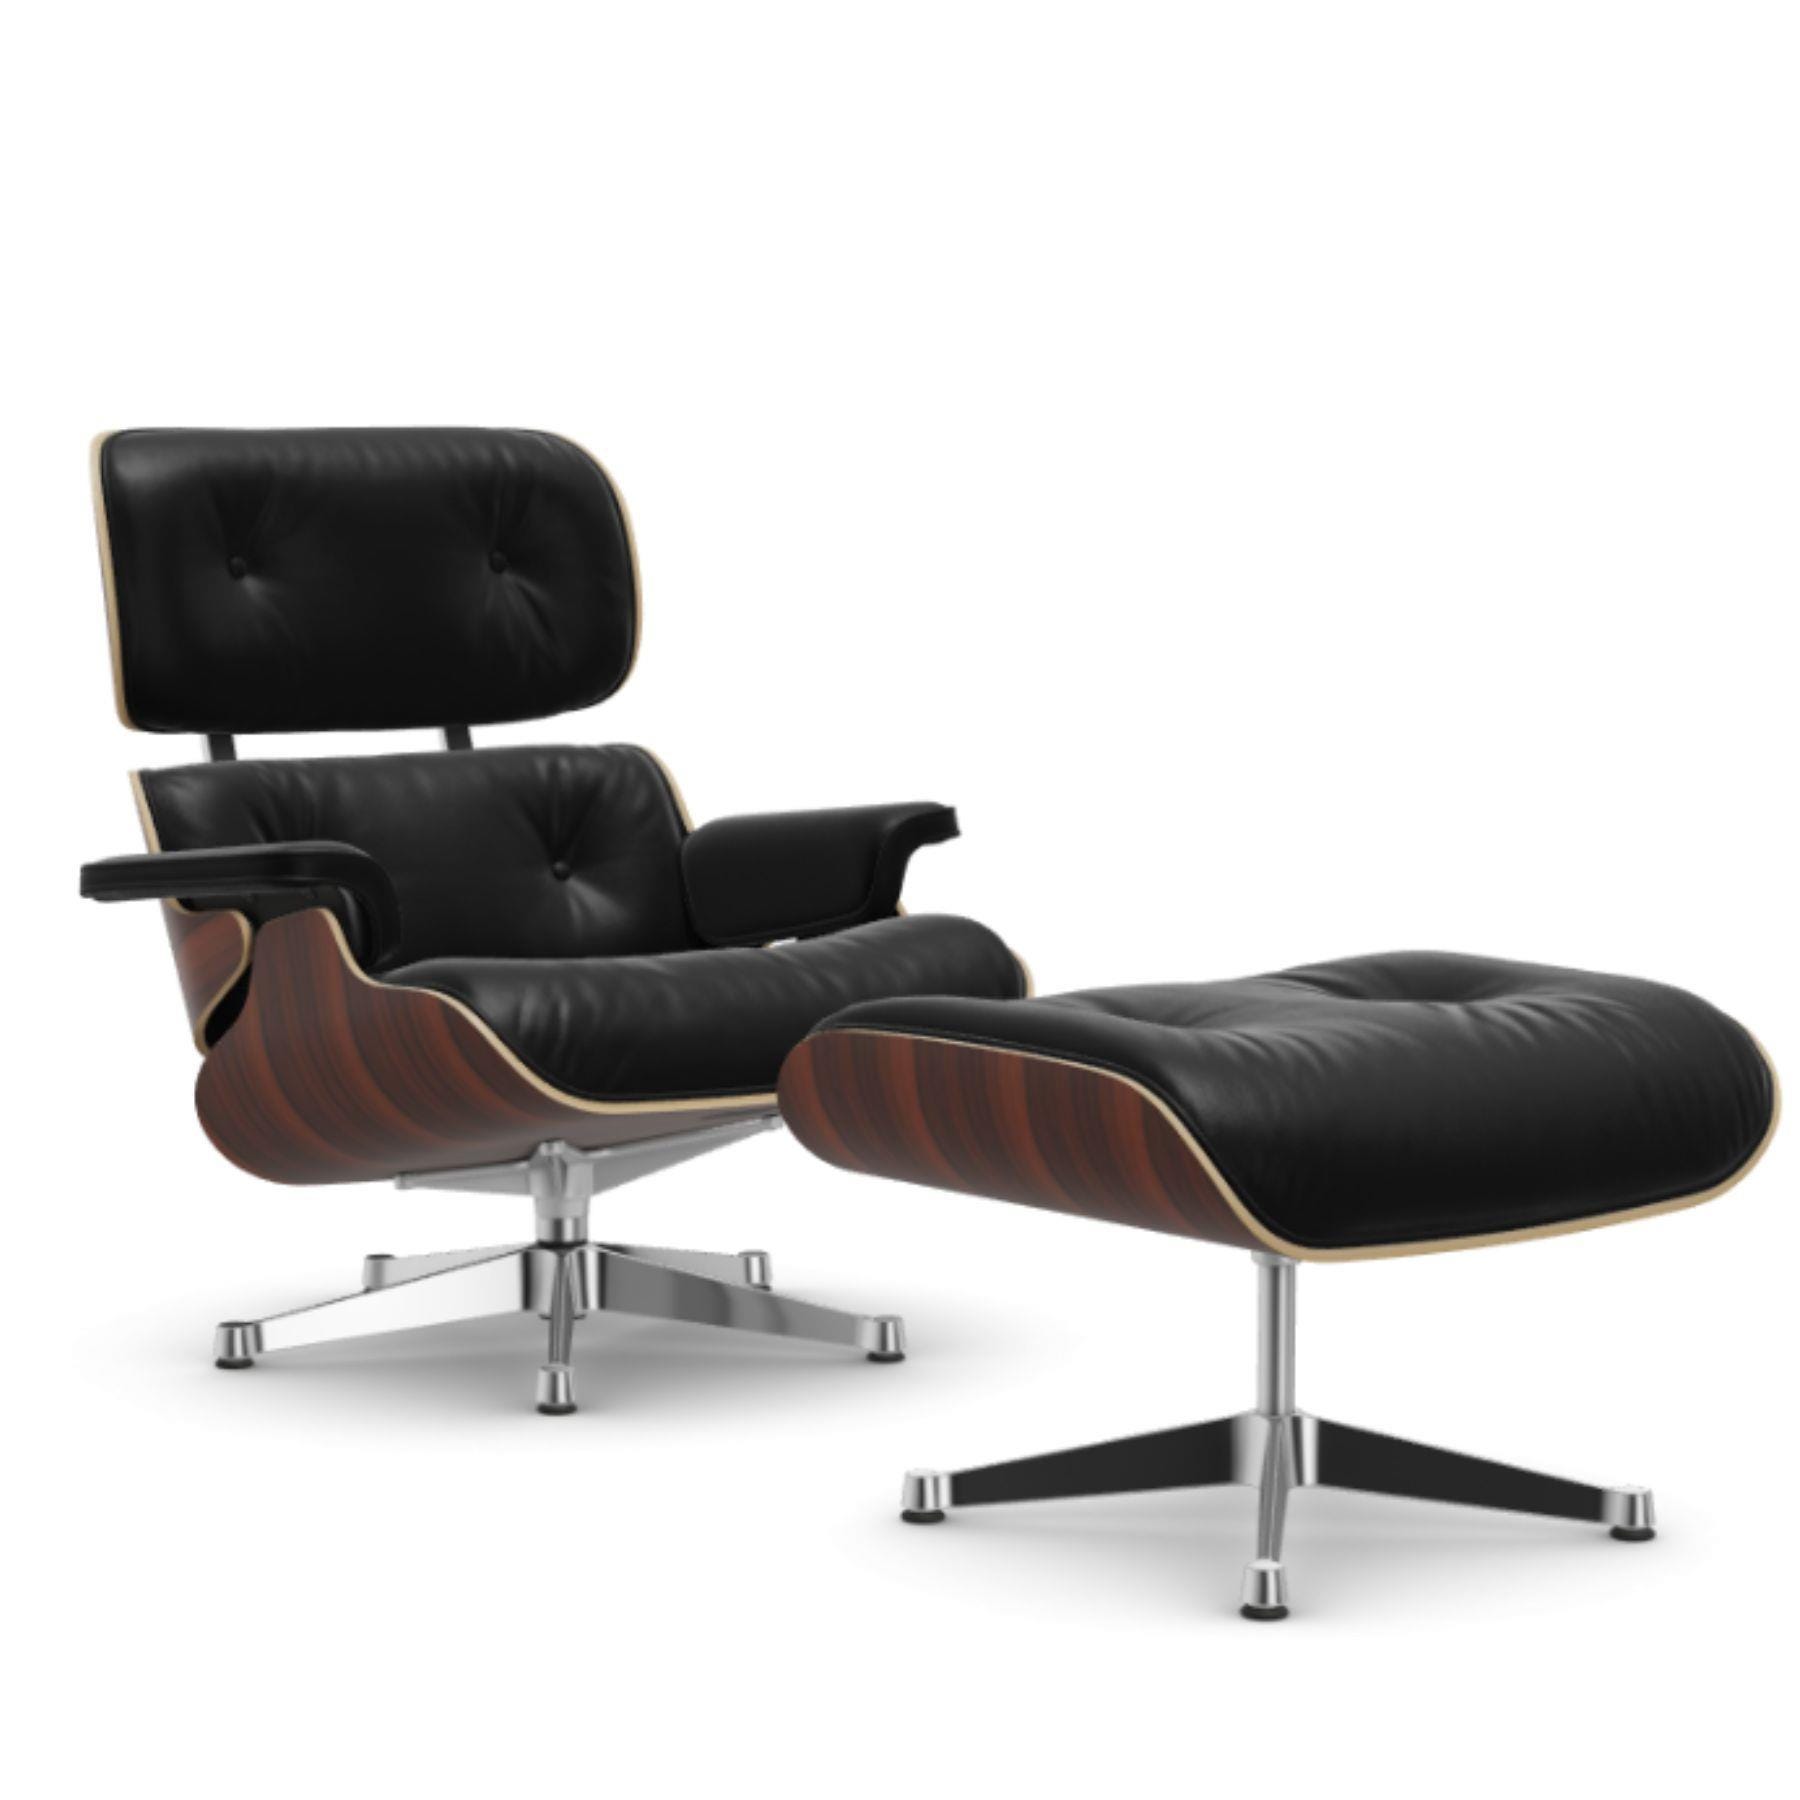 Vitra Eames Classic Lounge Chair Santos Palisander Leather Natural F Nero Polished Aluminium With Ottoman Light Wood Designer Furniture From Hollo